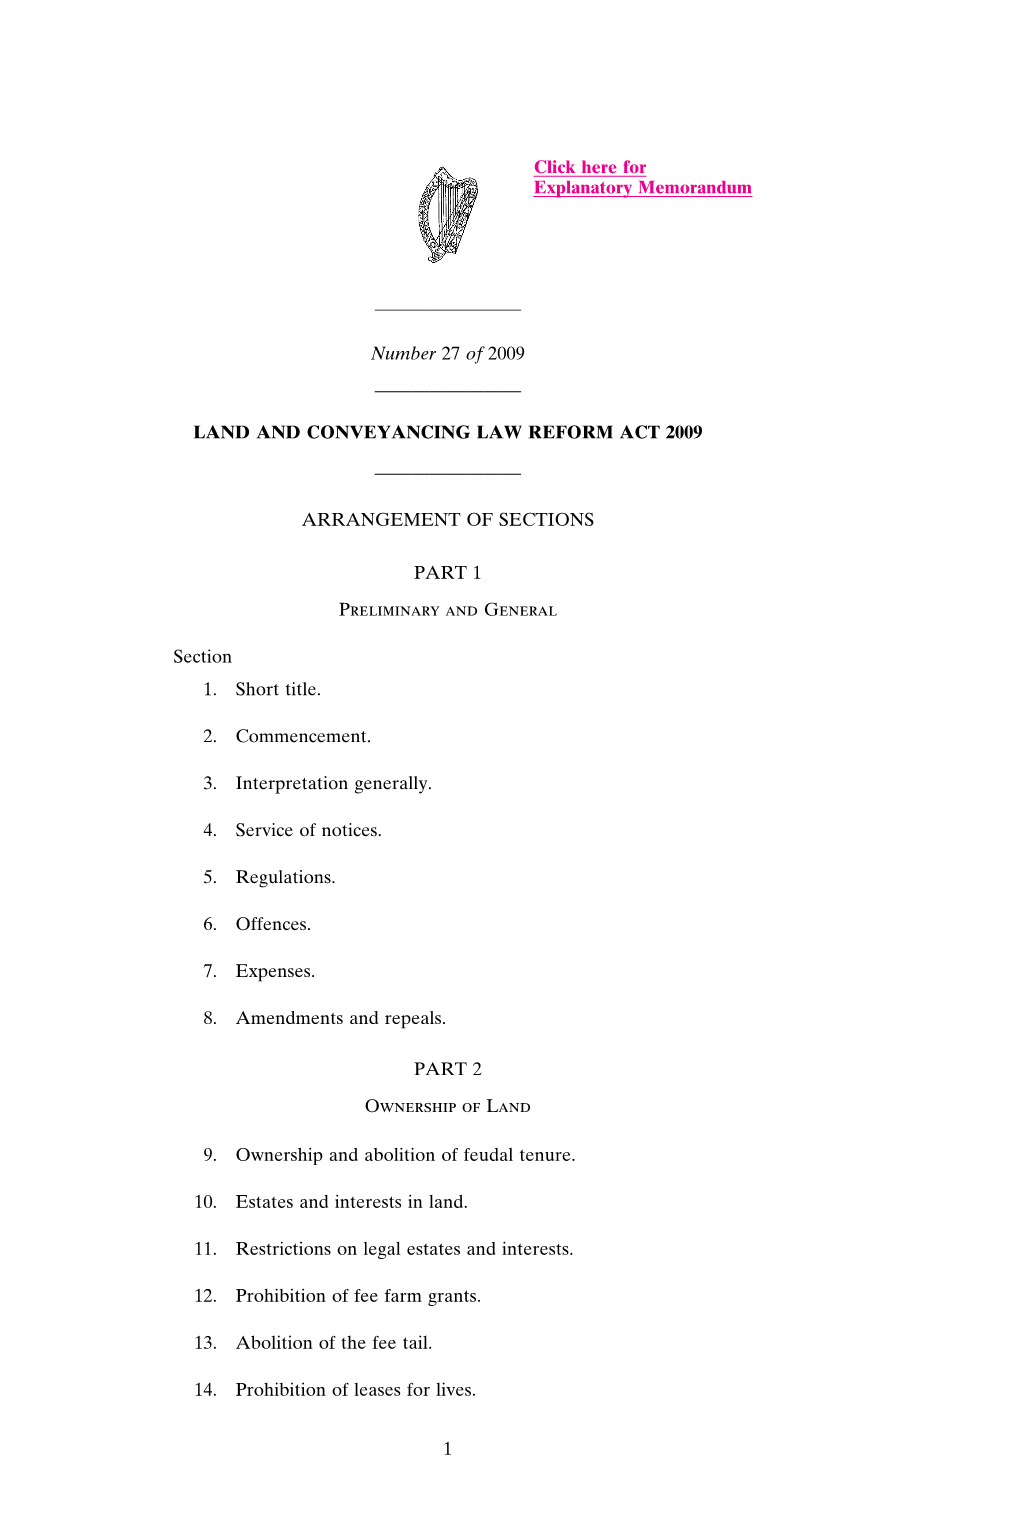 Land and Conveyancing Law Reform Act 2009